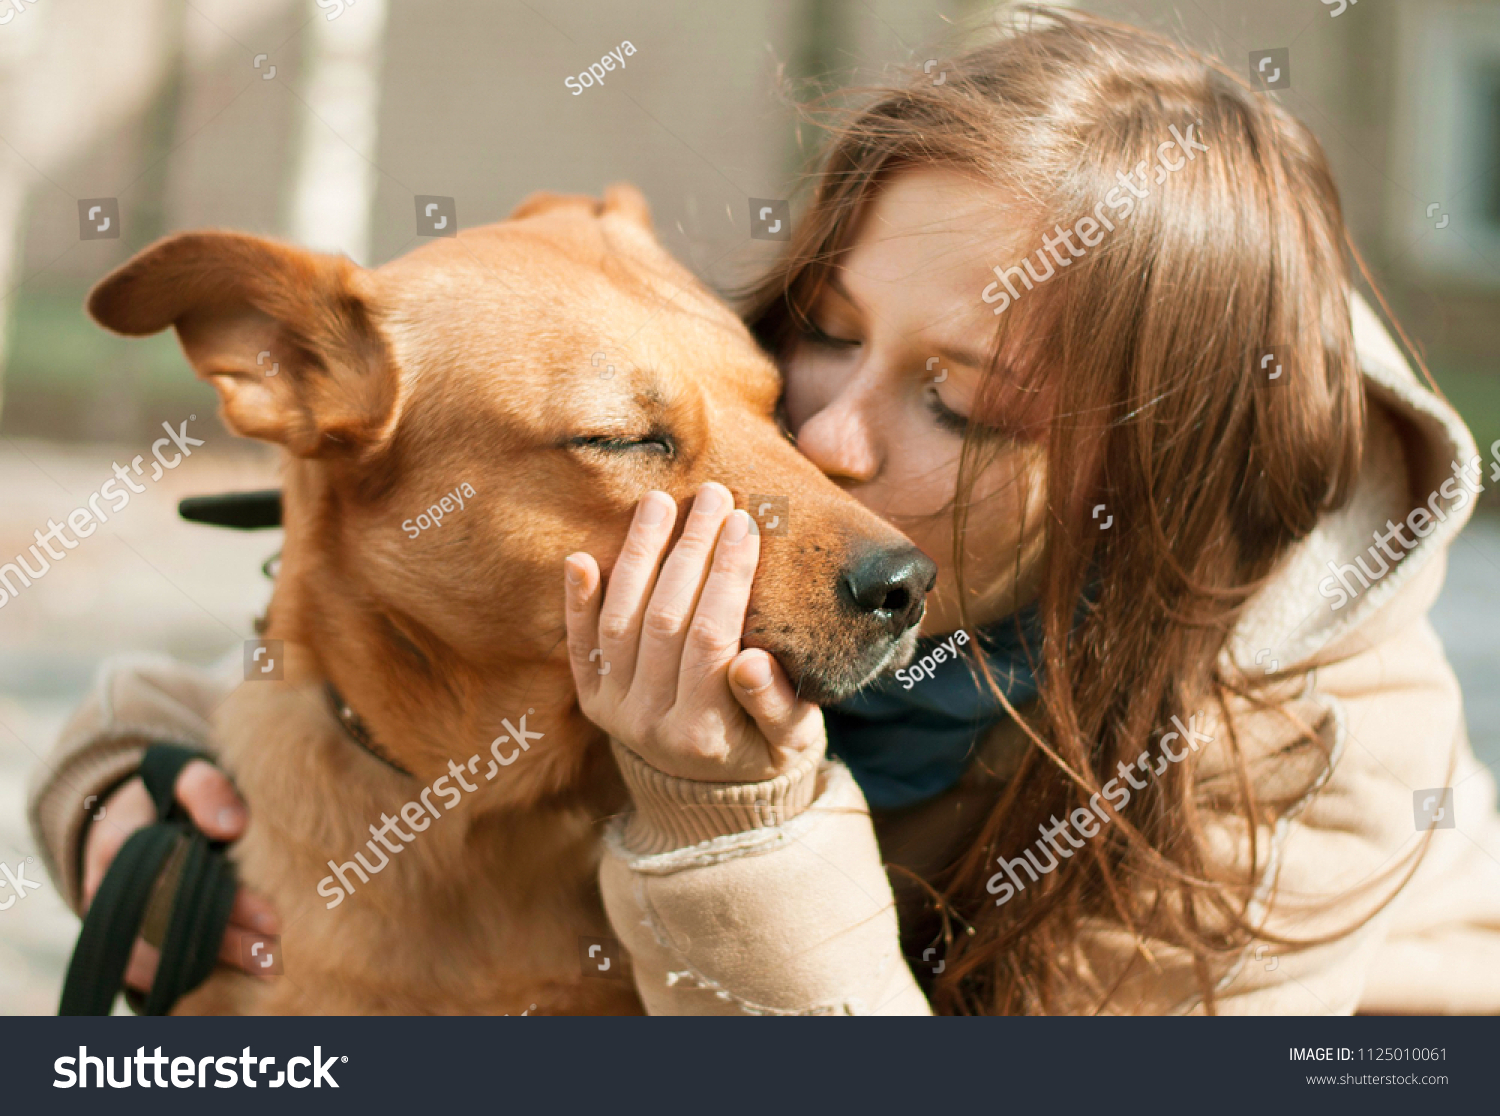 dog with girl funny